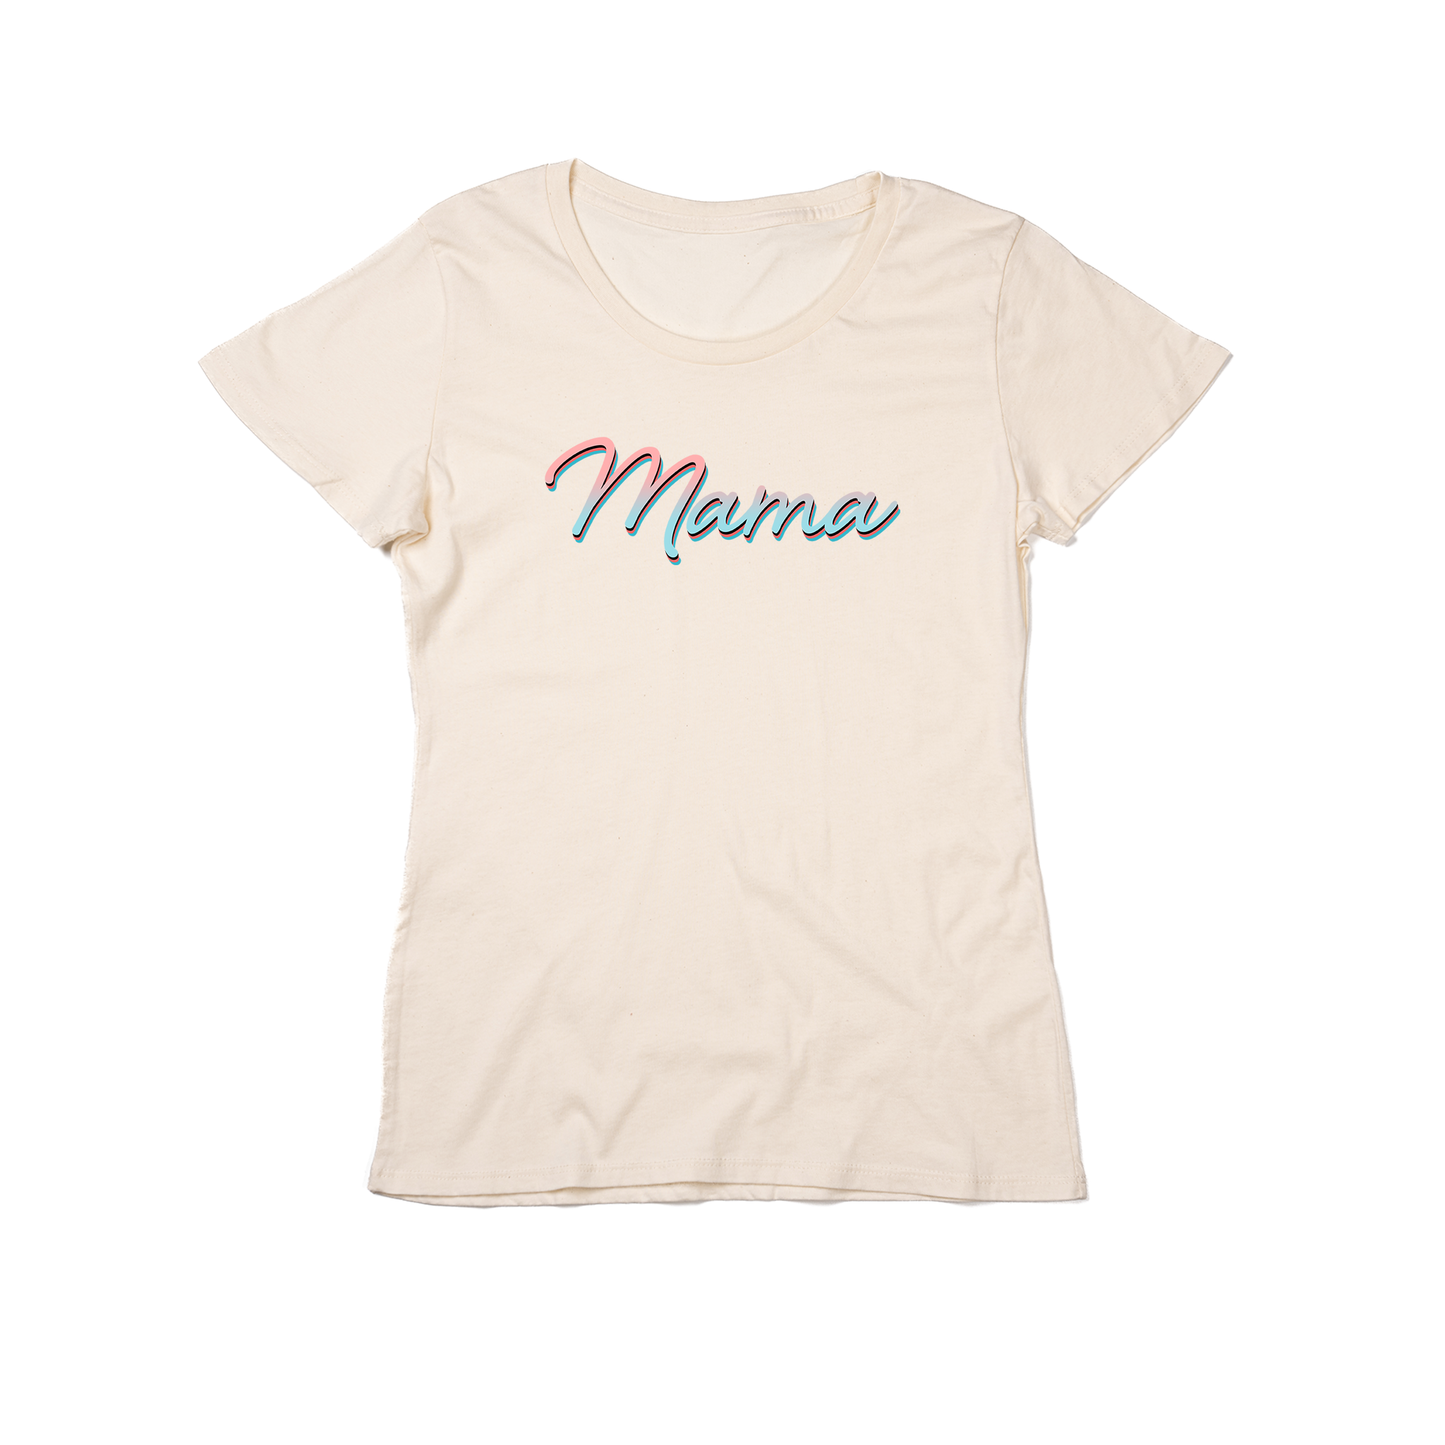 Mama (90's Inspired, Pink/Blue) - Women's Fitted Tee (Natural)